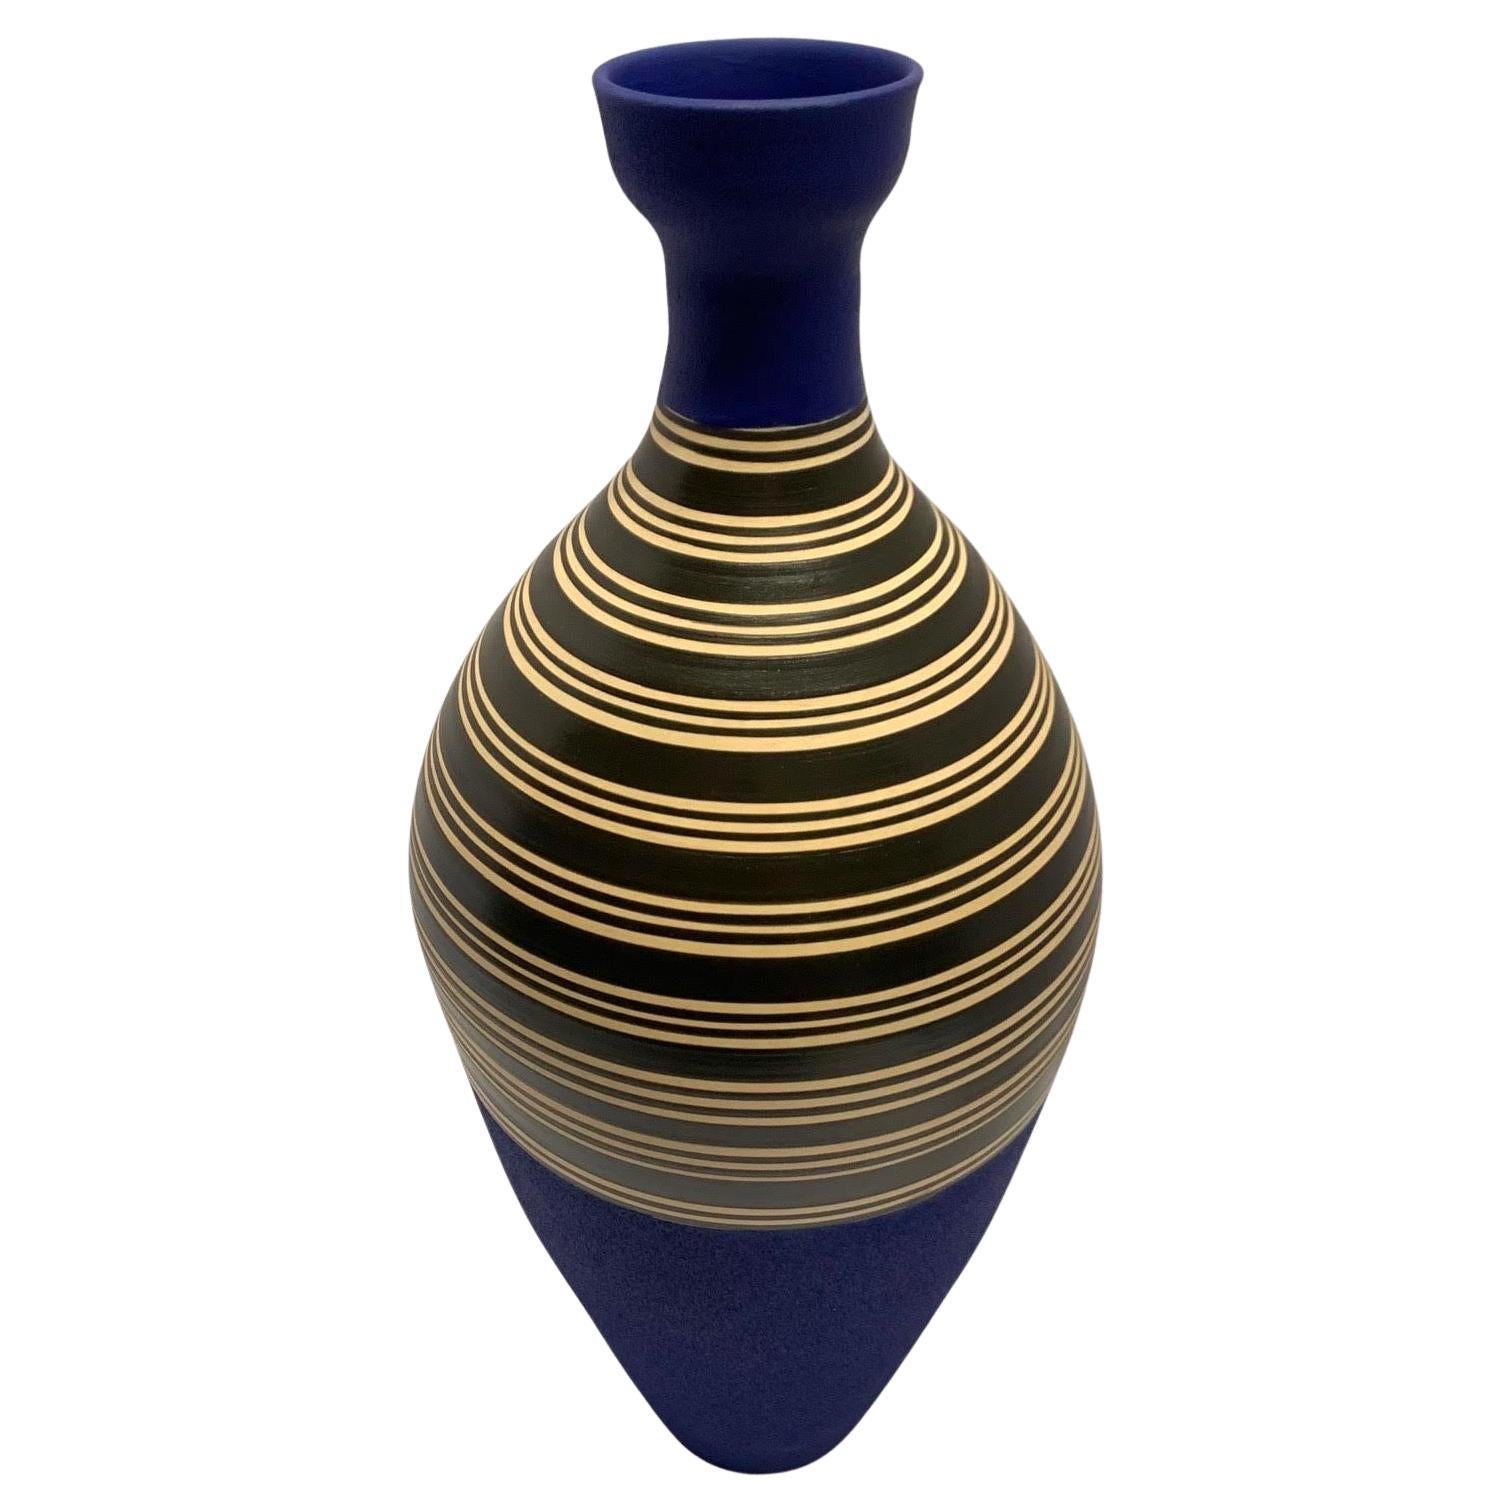 Cobalt Blue and Black and White Stripe Vase, Turkey, Contemporary For Sale